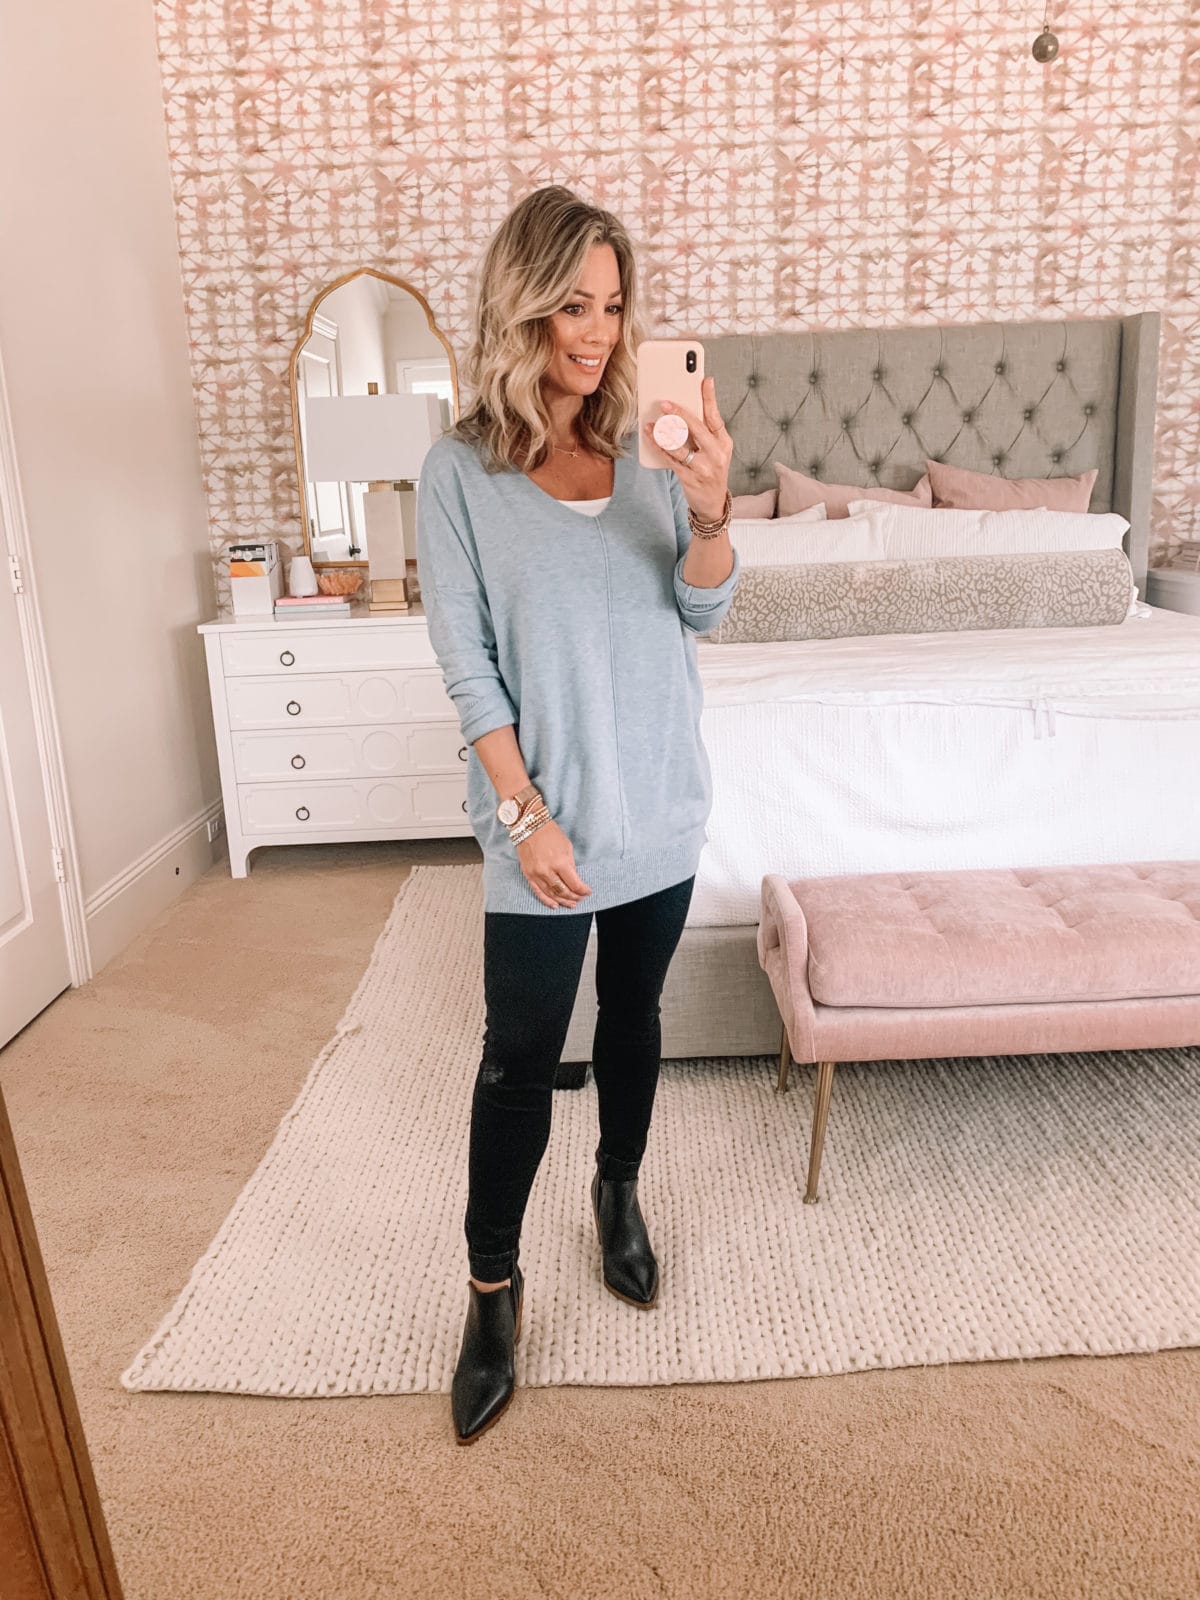 Amazon Fashion Faves, Tunic Sweater, Jeans, Booties